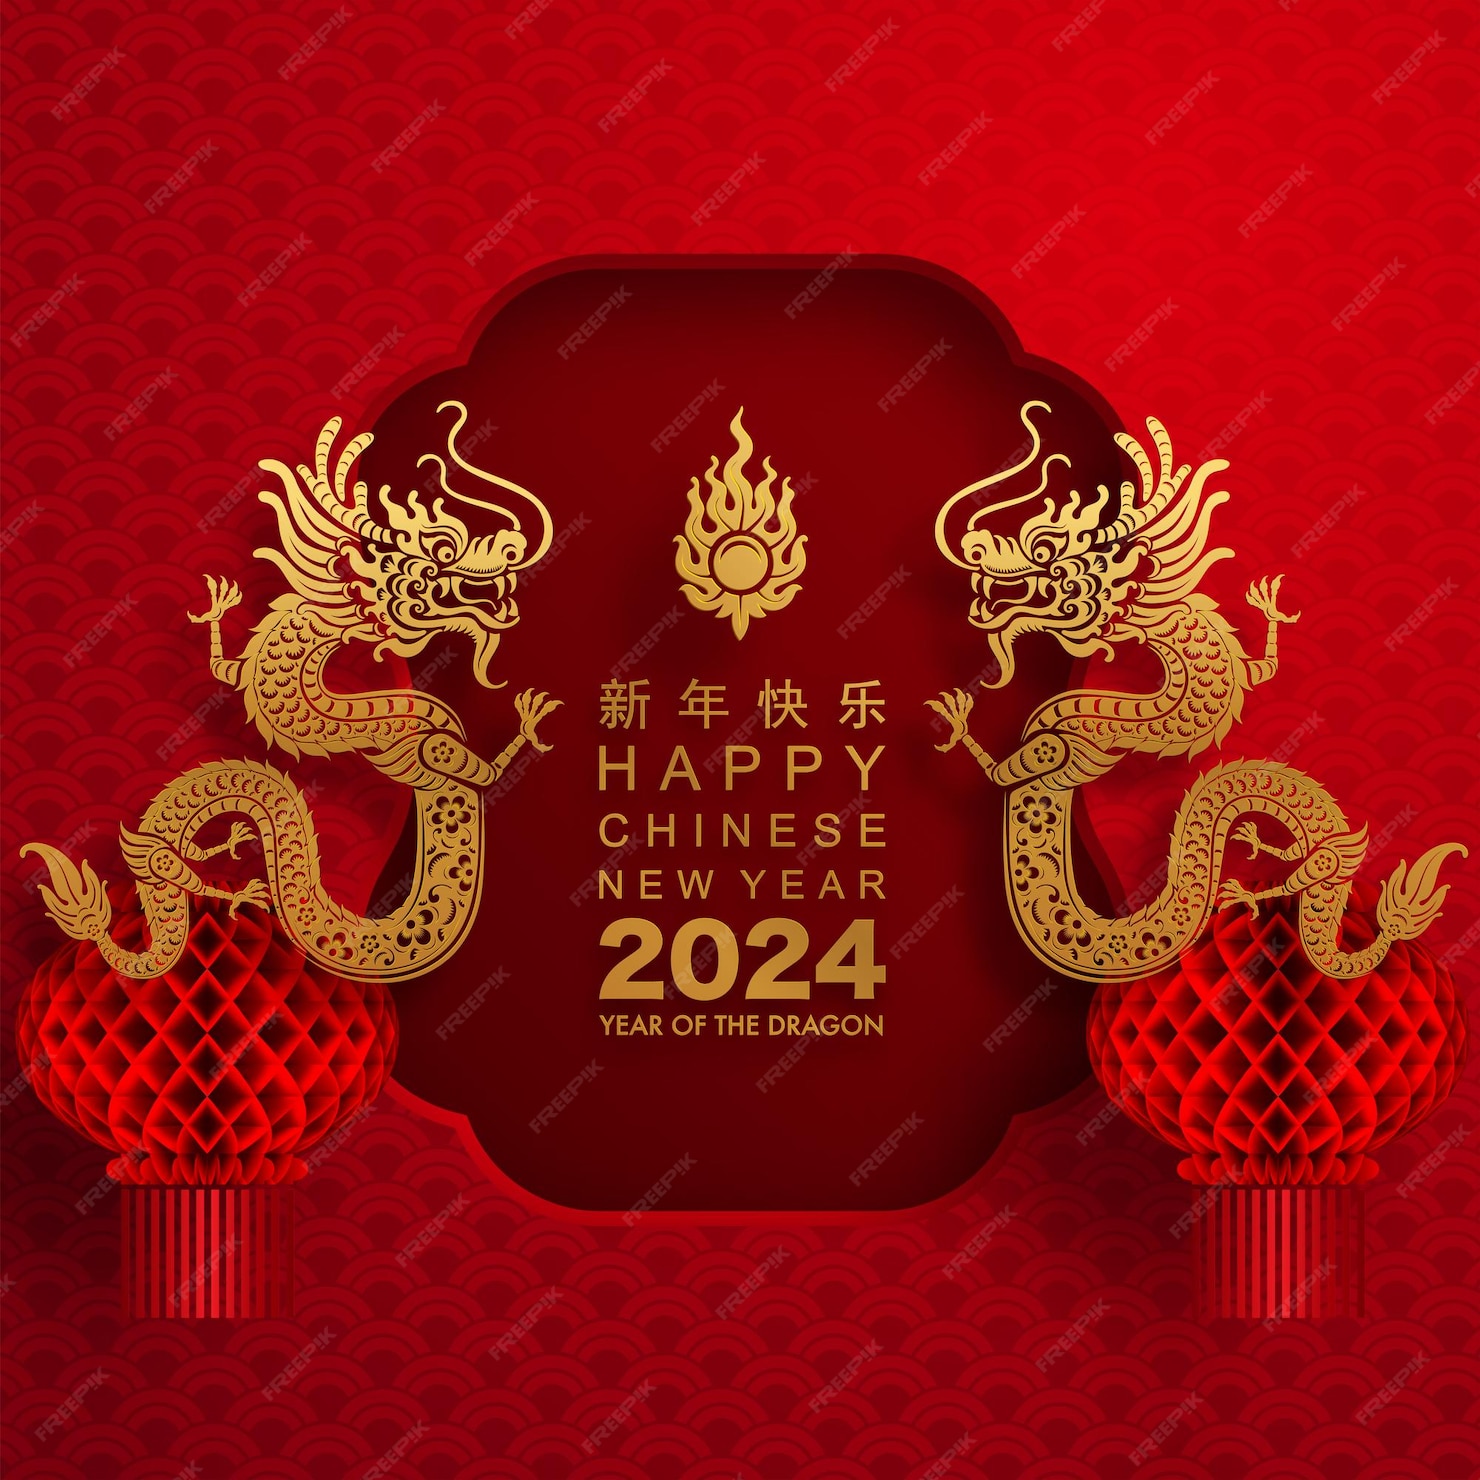 What's on 2024 Happy-chinese-new-year-2024-year-dragon-zodiac-sign_38689-4138